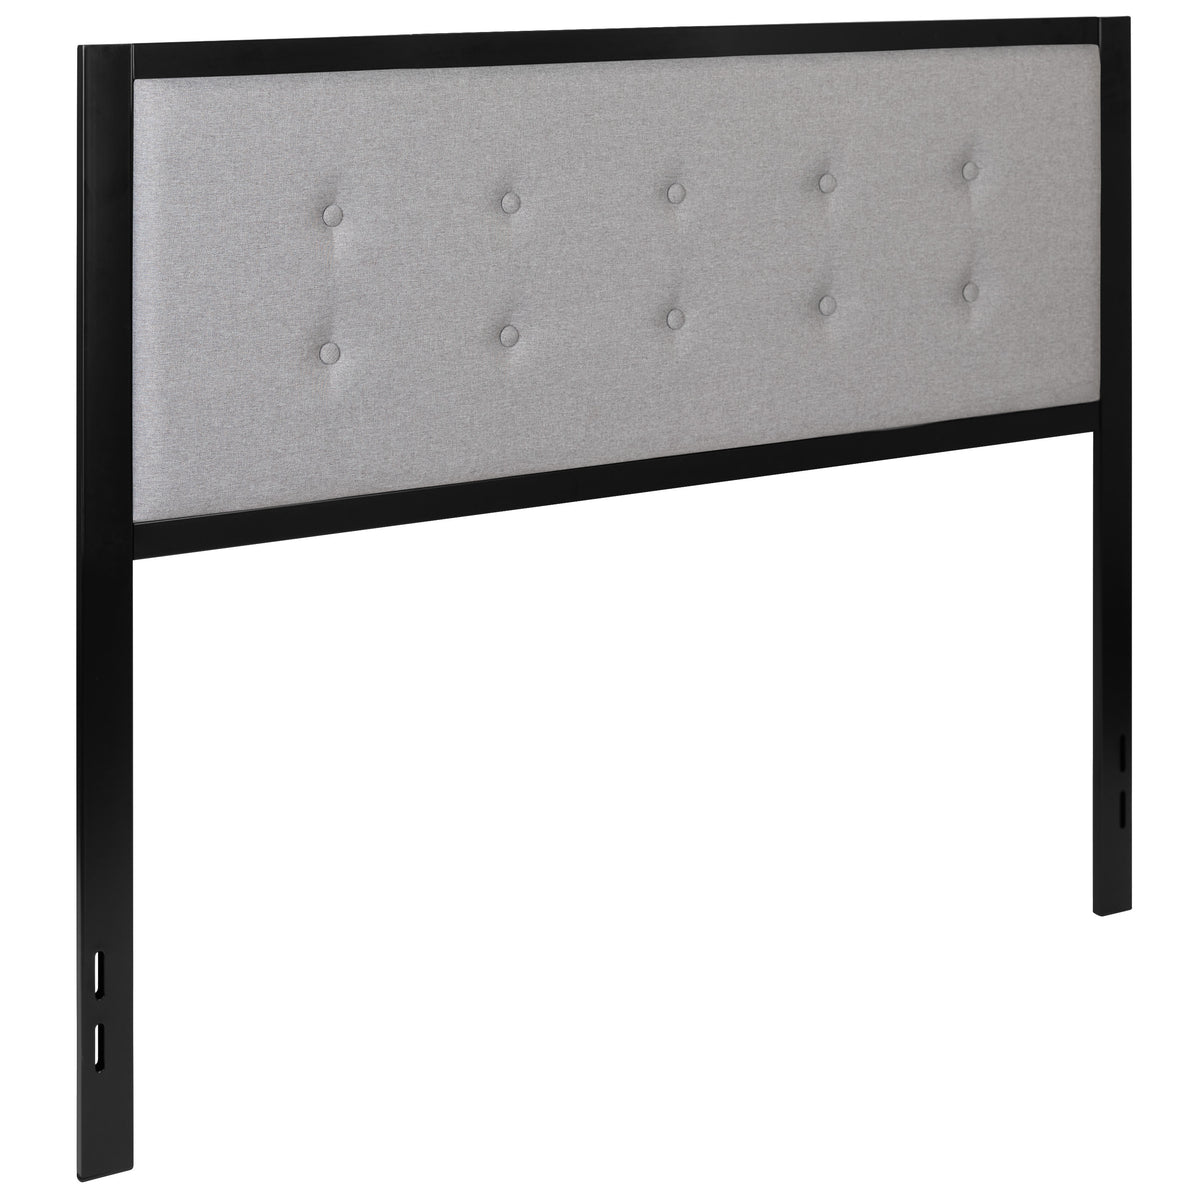 Light Gray,Queen |#| Queen Size Upholstered Metal Panel Headboard in Tufted Light Gray Fabric